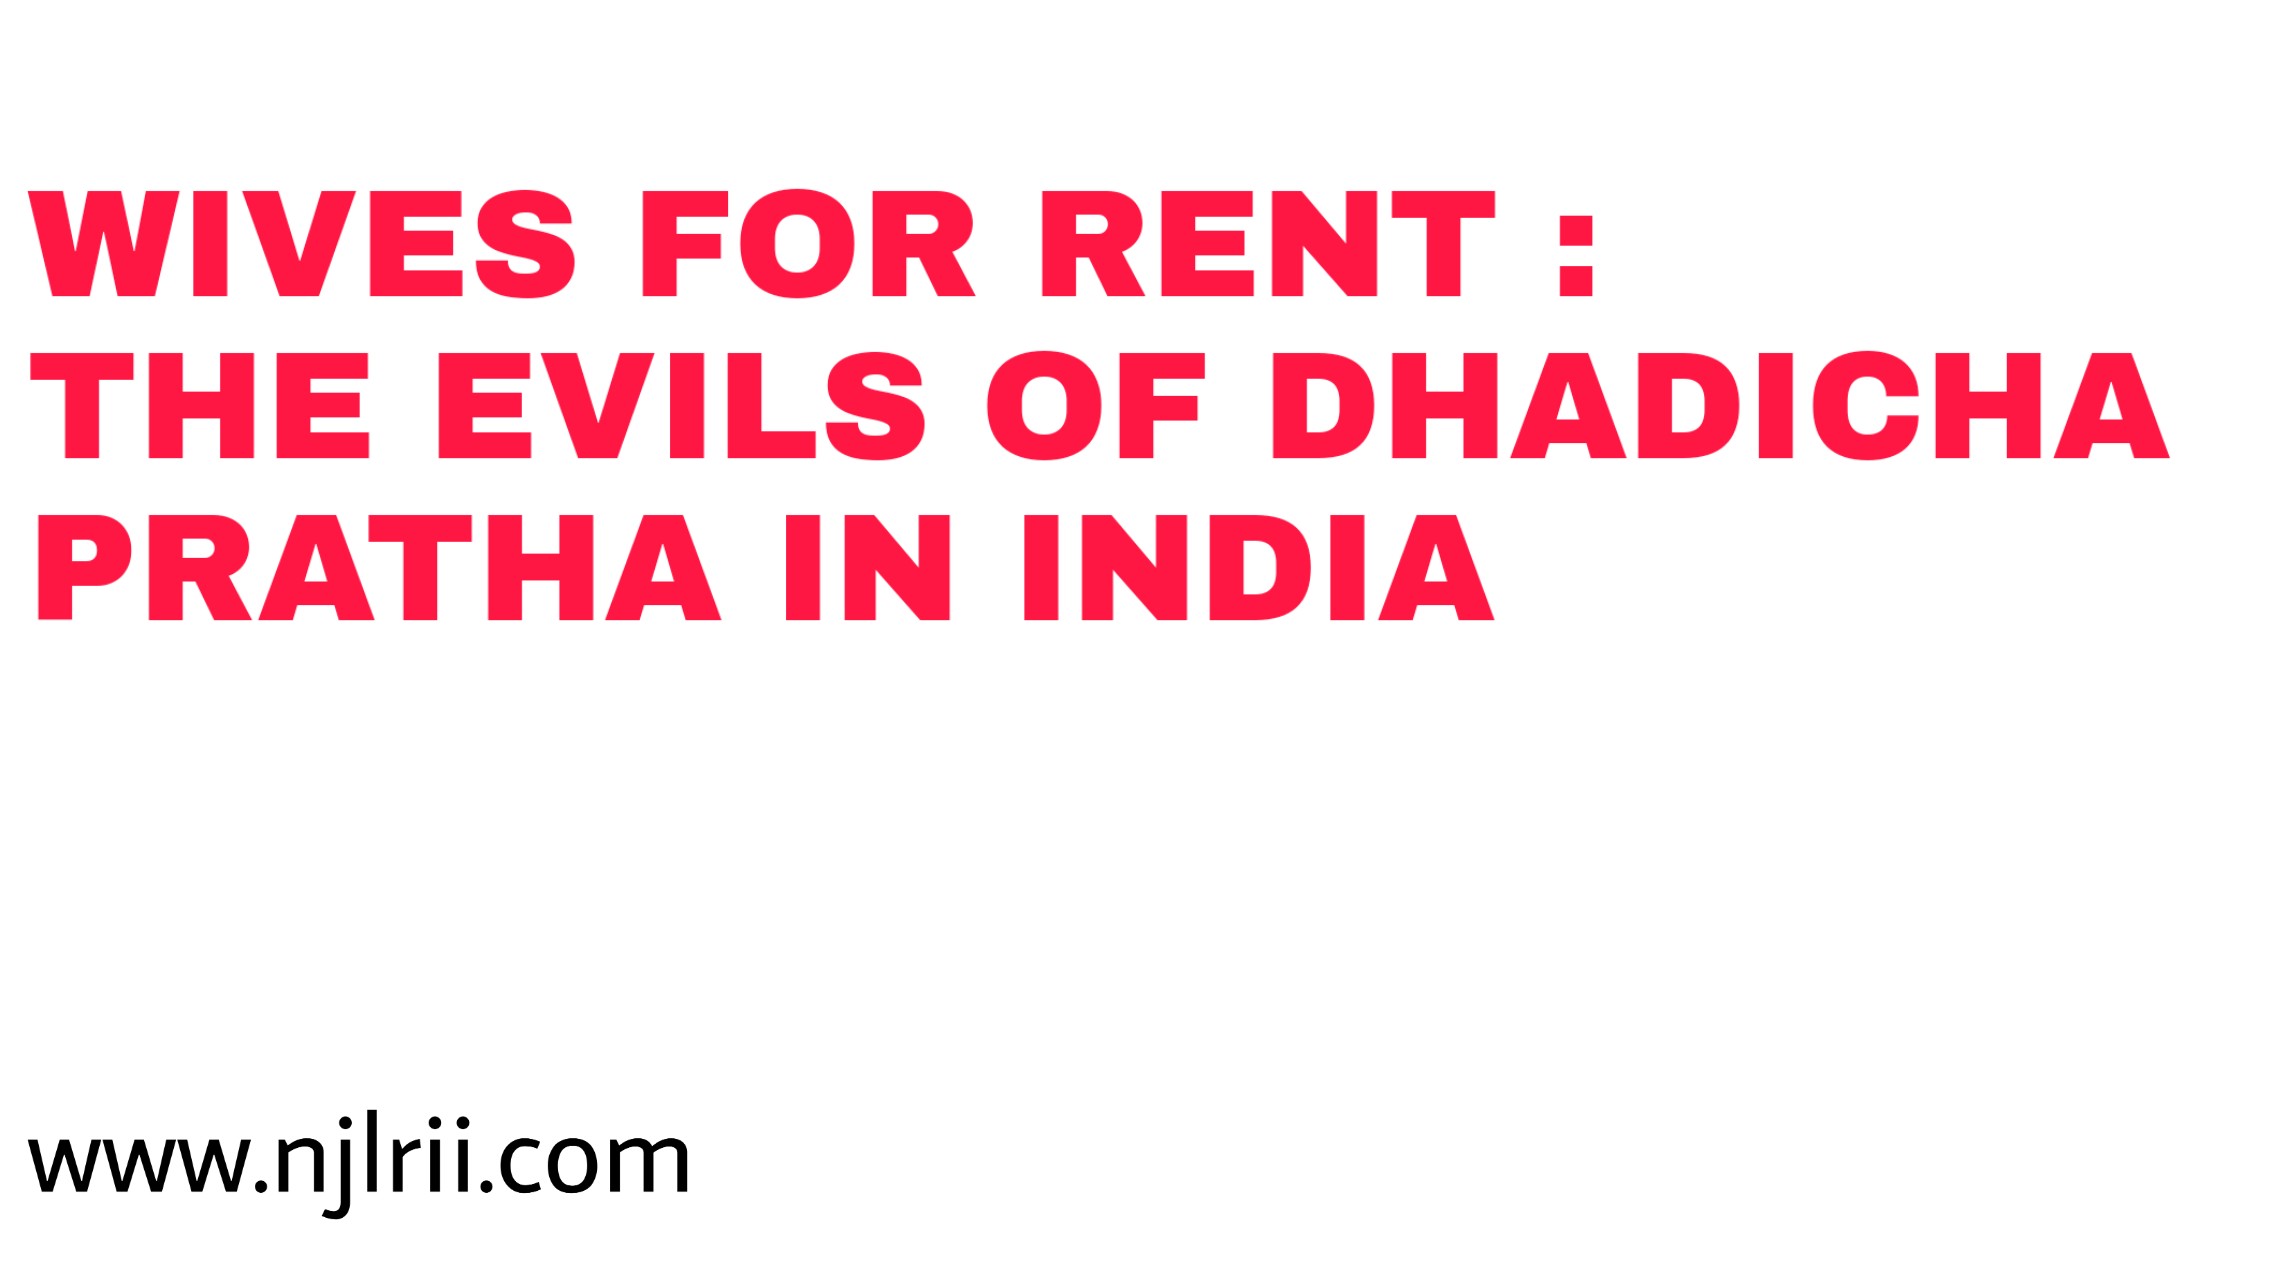 WIVES FOR RENT THE EVILS OF DHADICHA PRATHA IN INDIA pic pic